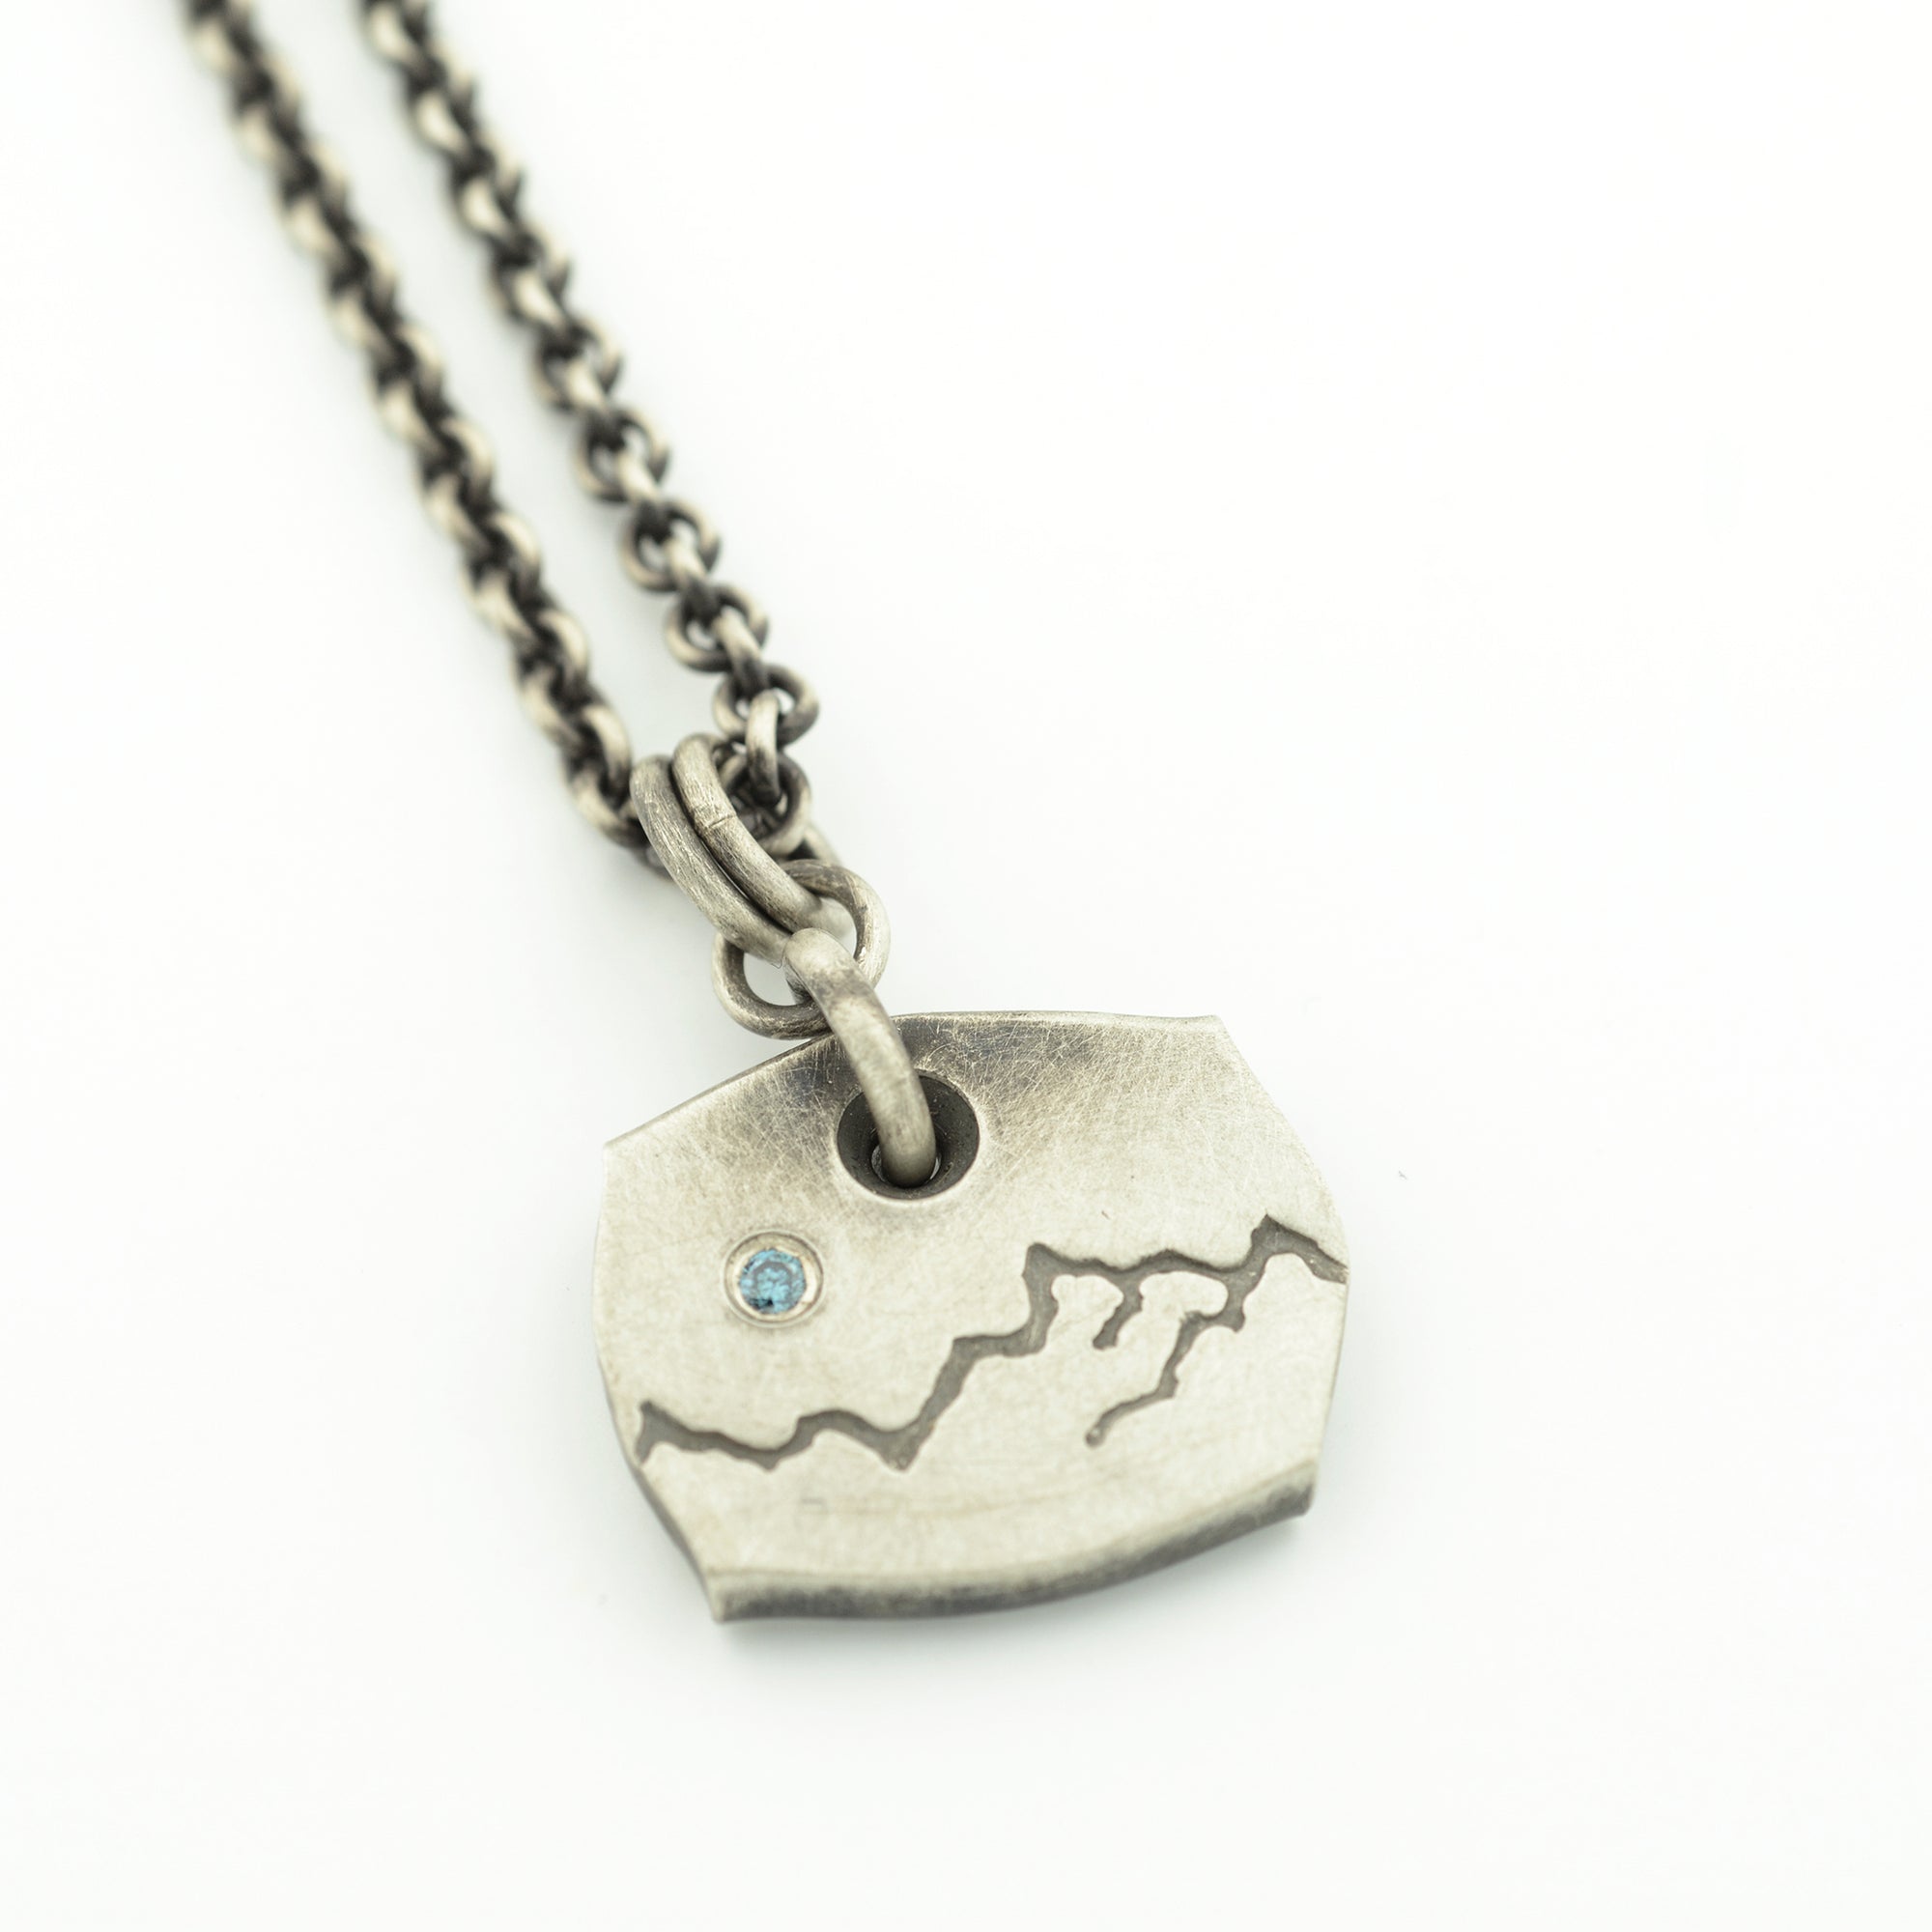 Sterling Silver with Mountain Range and Blue Diamond